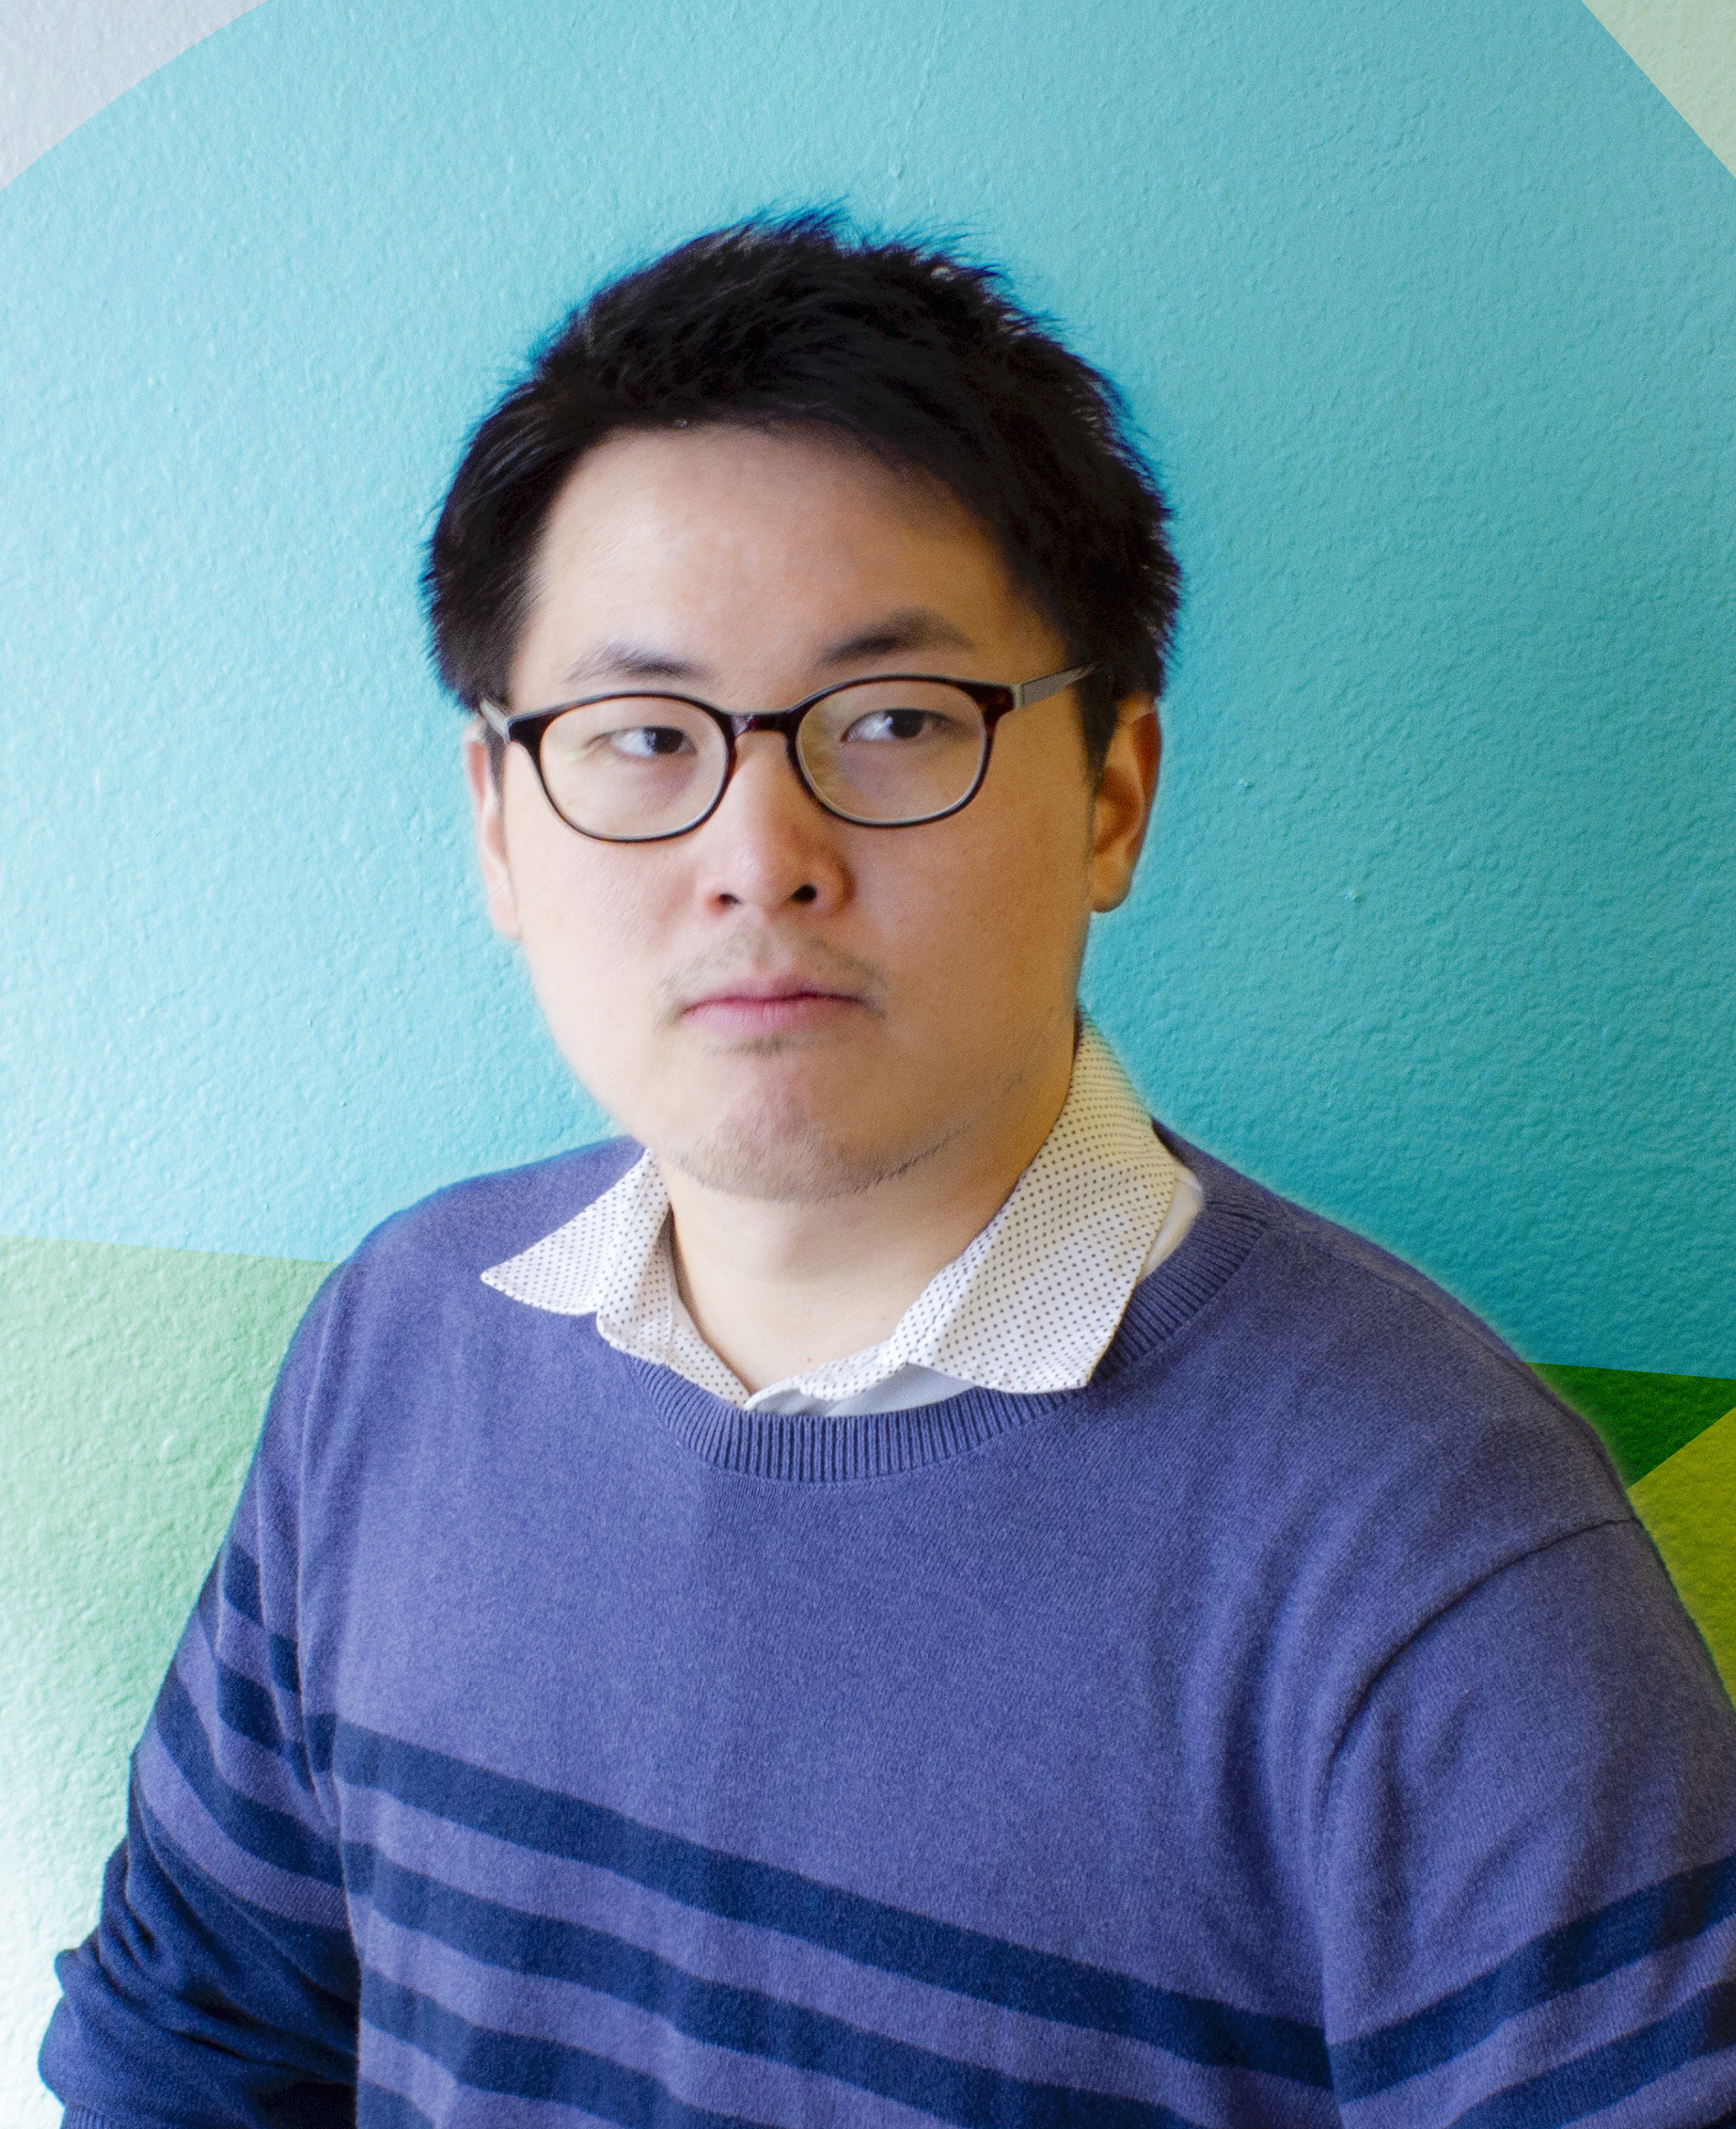 Photo of Ray Chang Weaver who is an Association of Independent Colleges of Art & Design (AICAD) Teaching Fellow during the 2021–22 academic year at ArtCenter College of Design